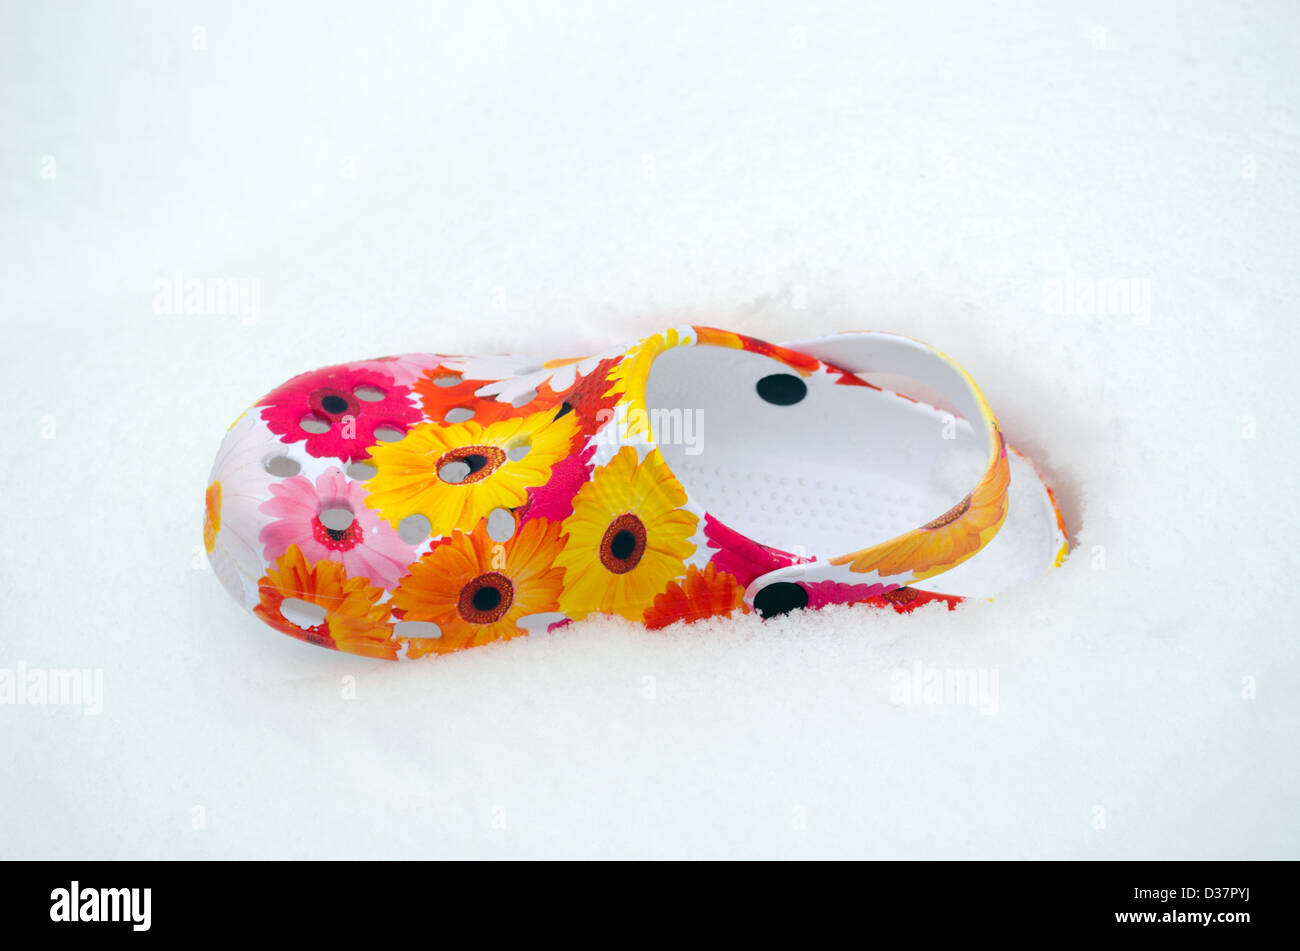 colorful slipper mule scuff with flowers lie on snow in winter snowbank. Stock Photo